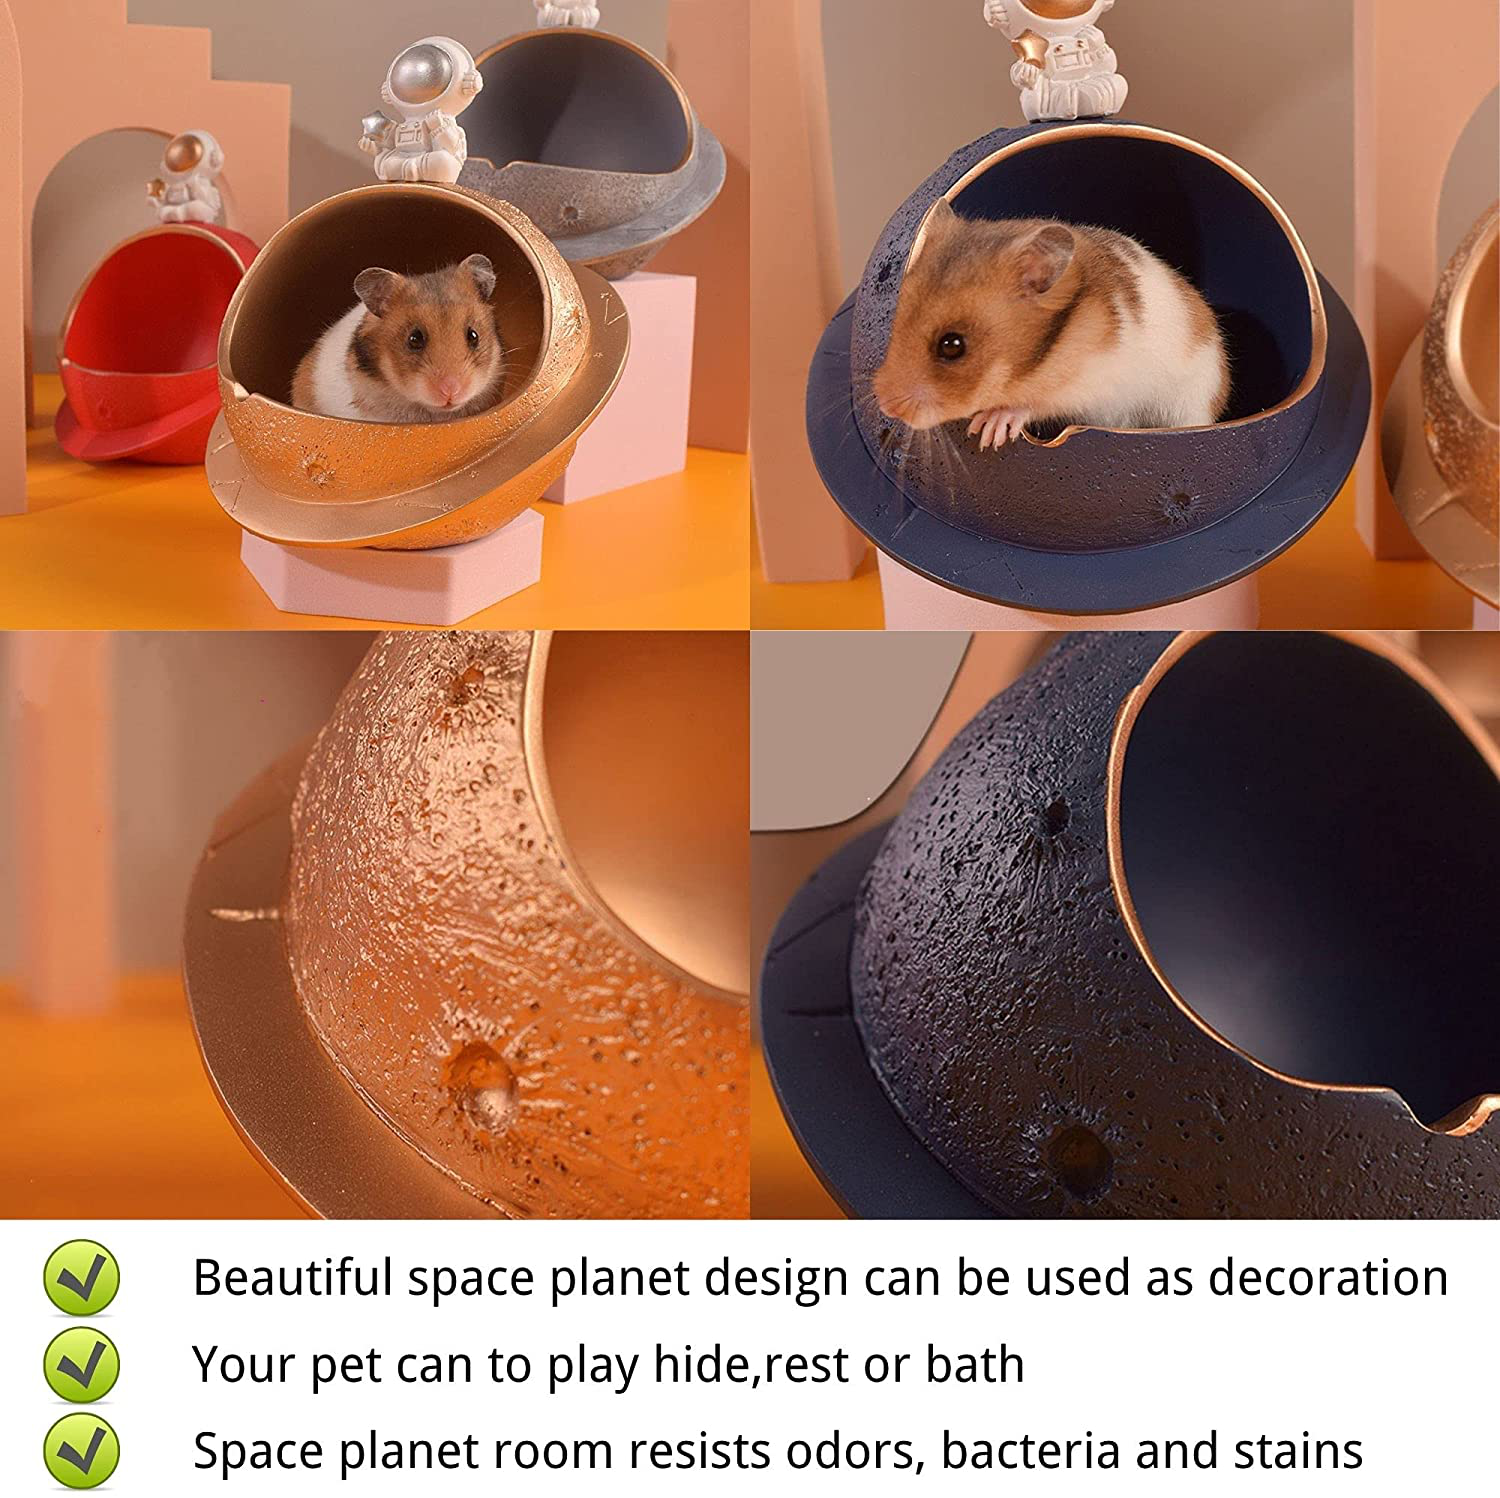 Janyoo Hamster Hideout,Rathut Dwarf Hamster House Bed Chinchilla for Gerbils Mice Small Animal Cage Habitat Decor Resin Room